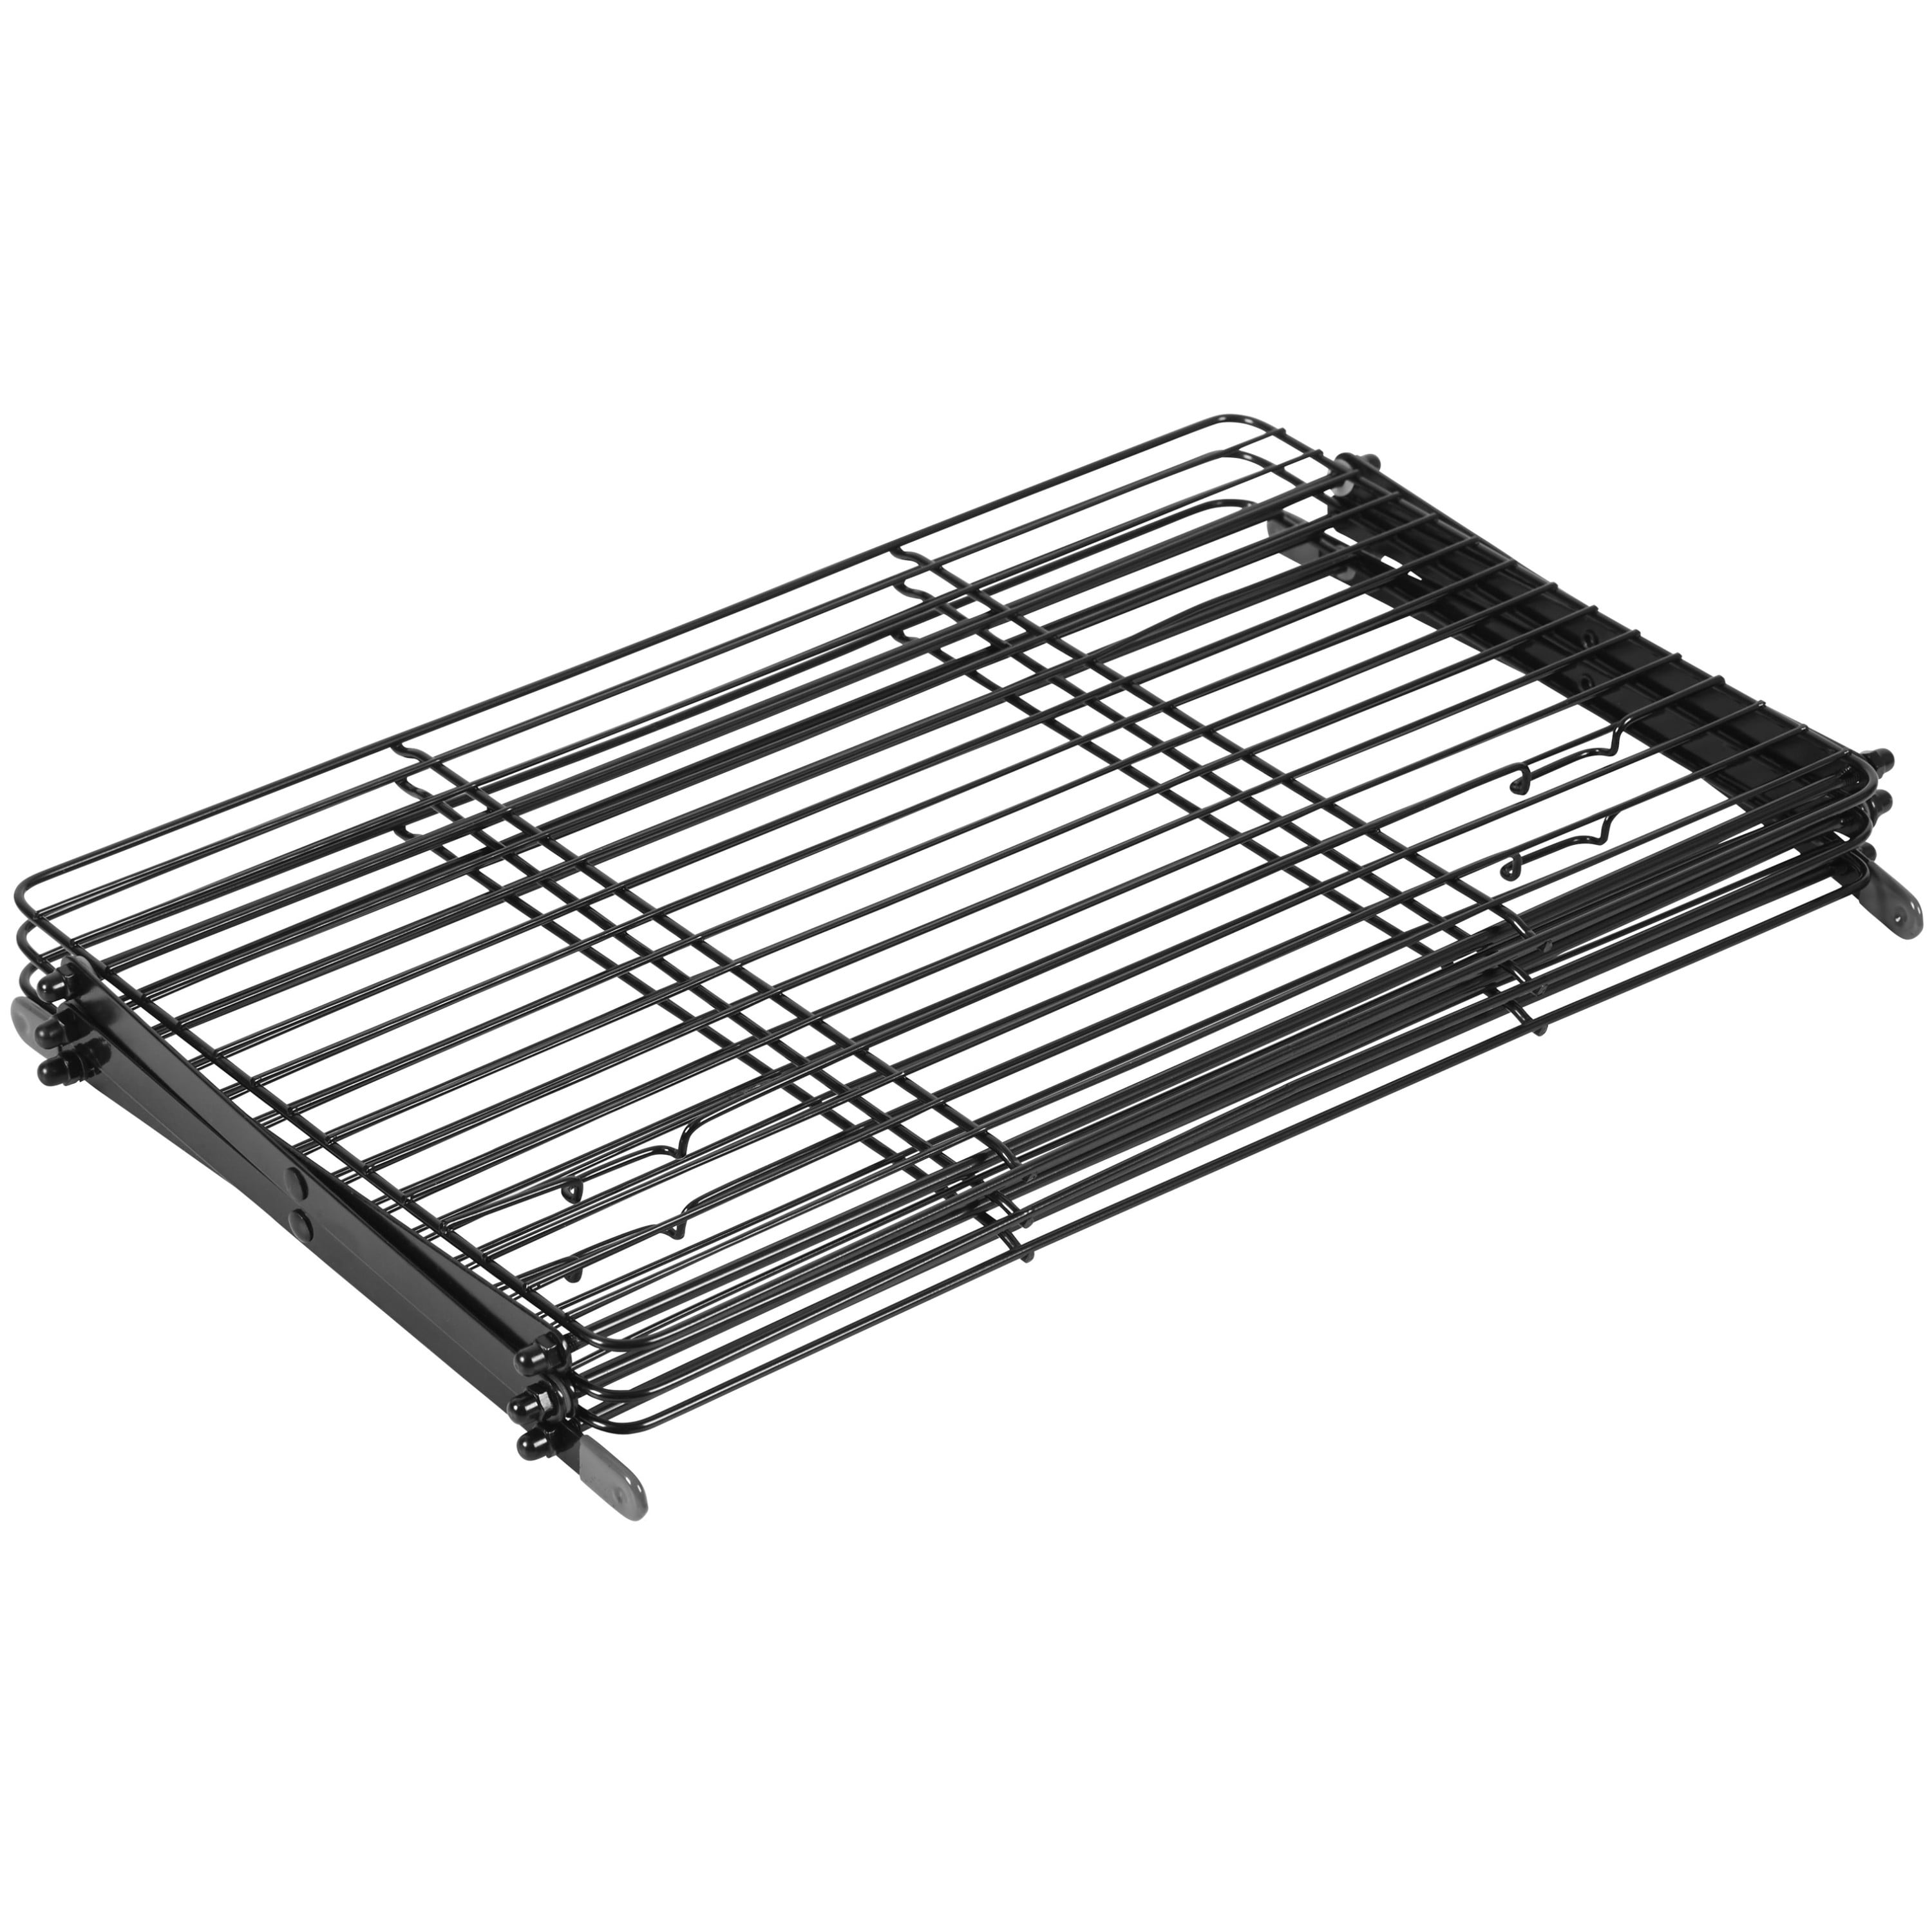  3-Tier 17x7 Stackable cooling rack,Non-stick and anti-rust cooling  racks for cooking and baking,Upgraded collapsible cooking rack wire rack  for baking,Fit Half Sheet Pan & Oven Safe & Gift packing: Home 